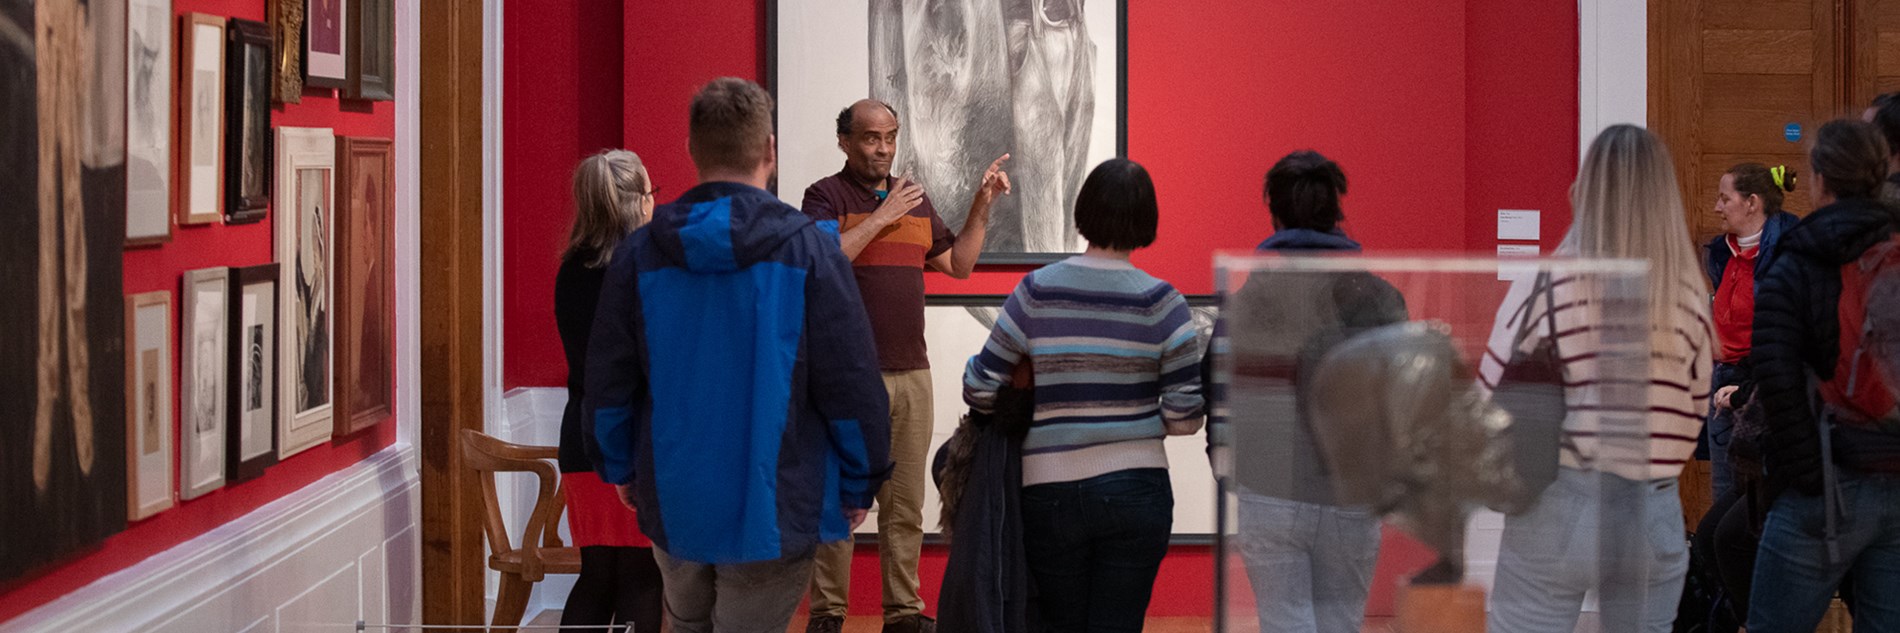 A group of visitors in an art gallery, having a tour with a guide in British Sign Language.